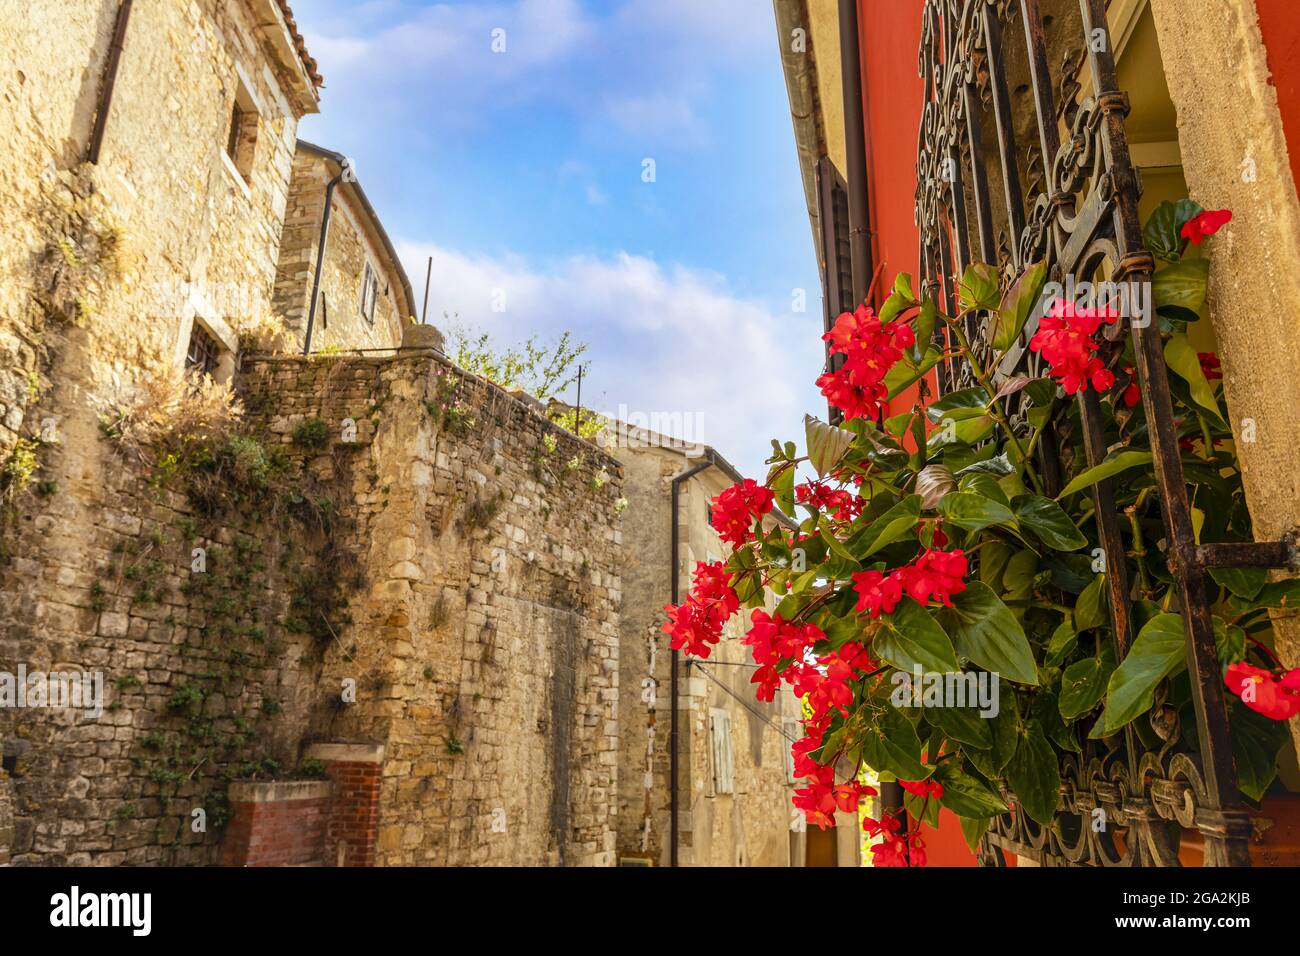 Close-up of bright, red flowers blooming through an iron window grill and the old stone buildings lining the streets of the medieval village of Mot... Stock Photo